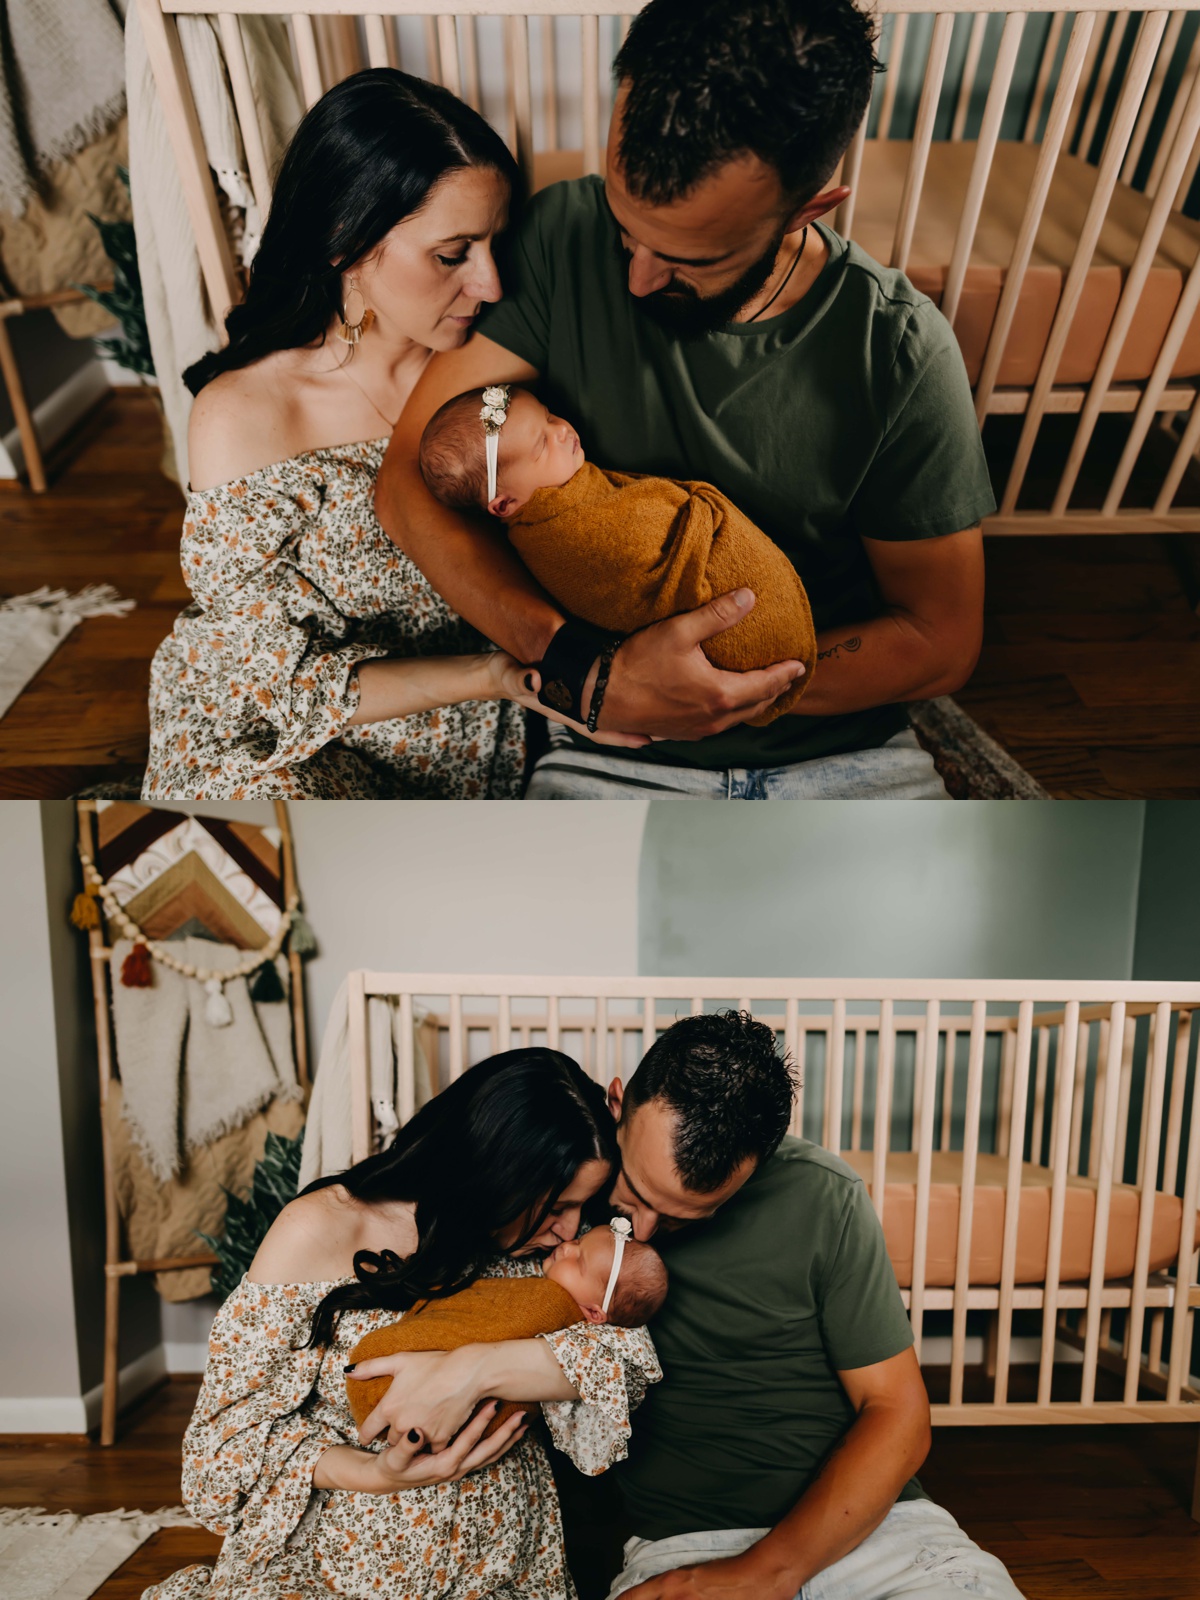 Portrait photos of a mom and dad with their newborn baby in the nursery during their newborn baby photo session.